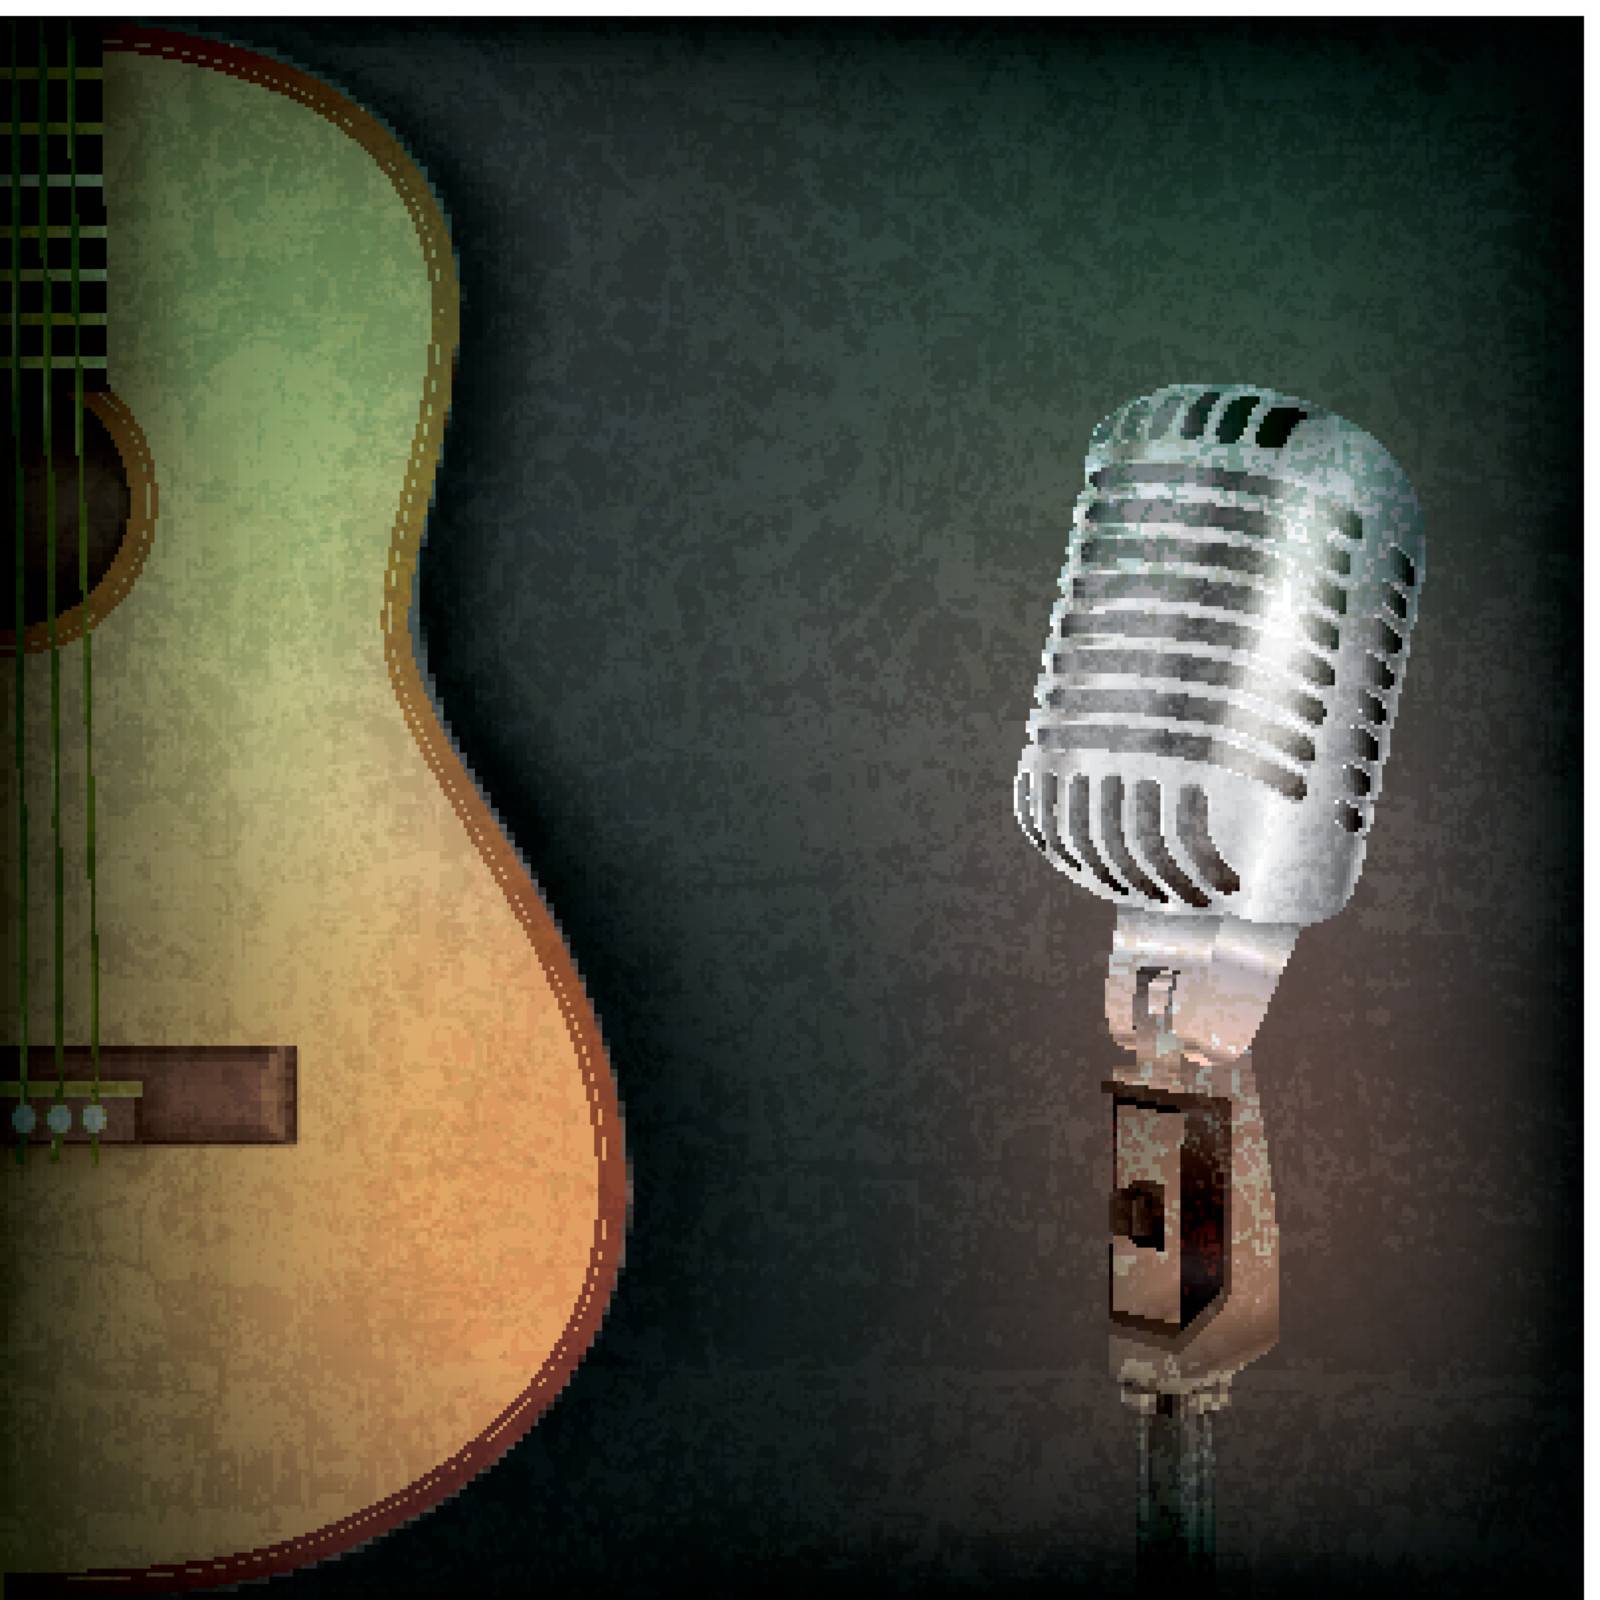 abstract music grunge background with retro microphone and guitar